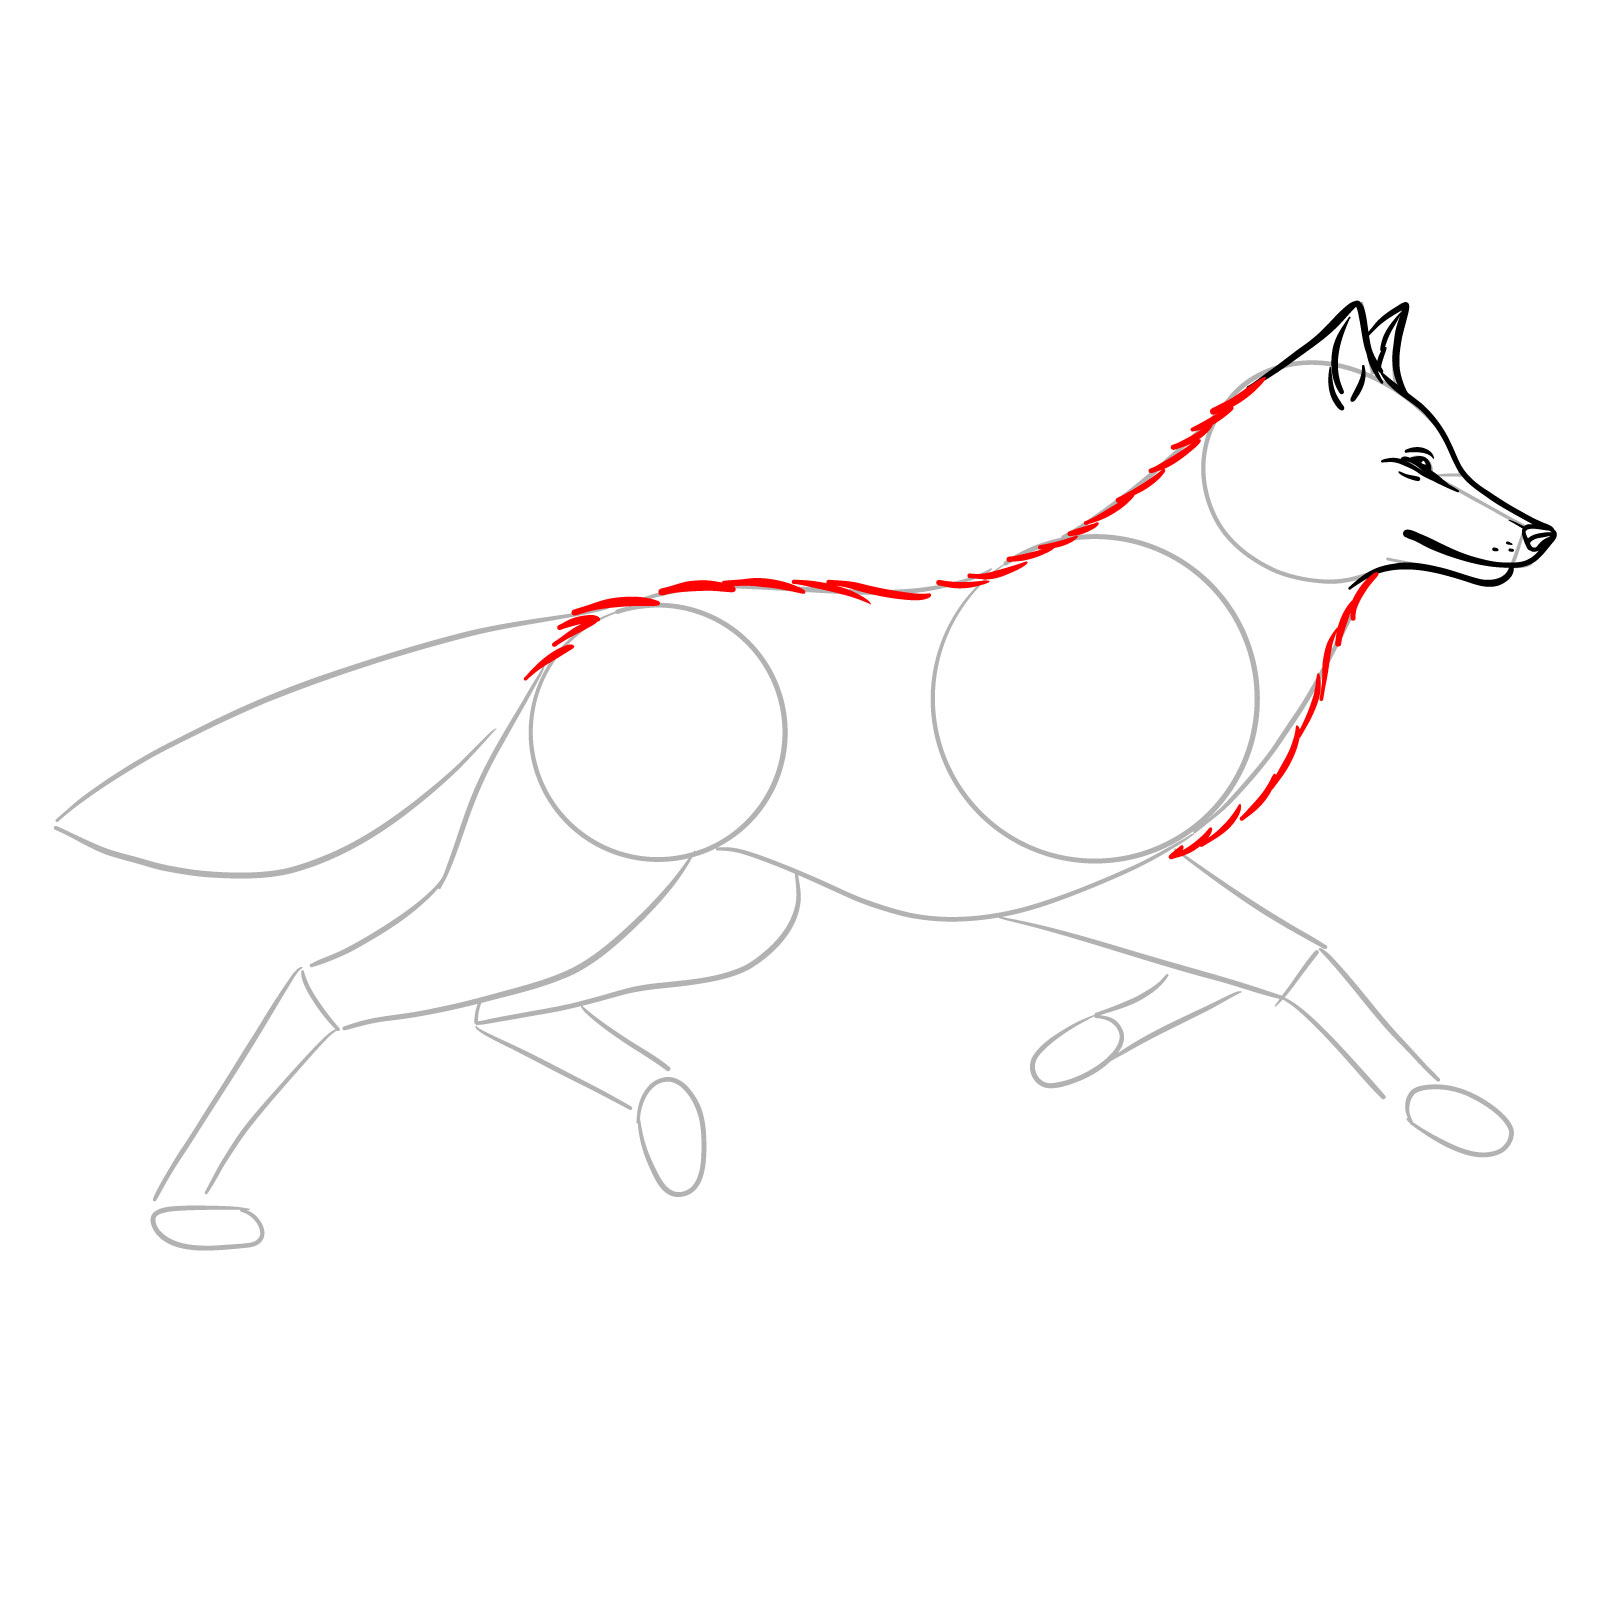 Outlining the neck, back, and chest fur for a running wolf drawing - step 06